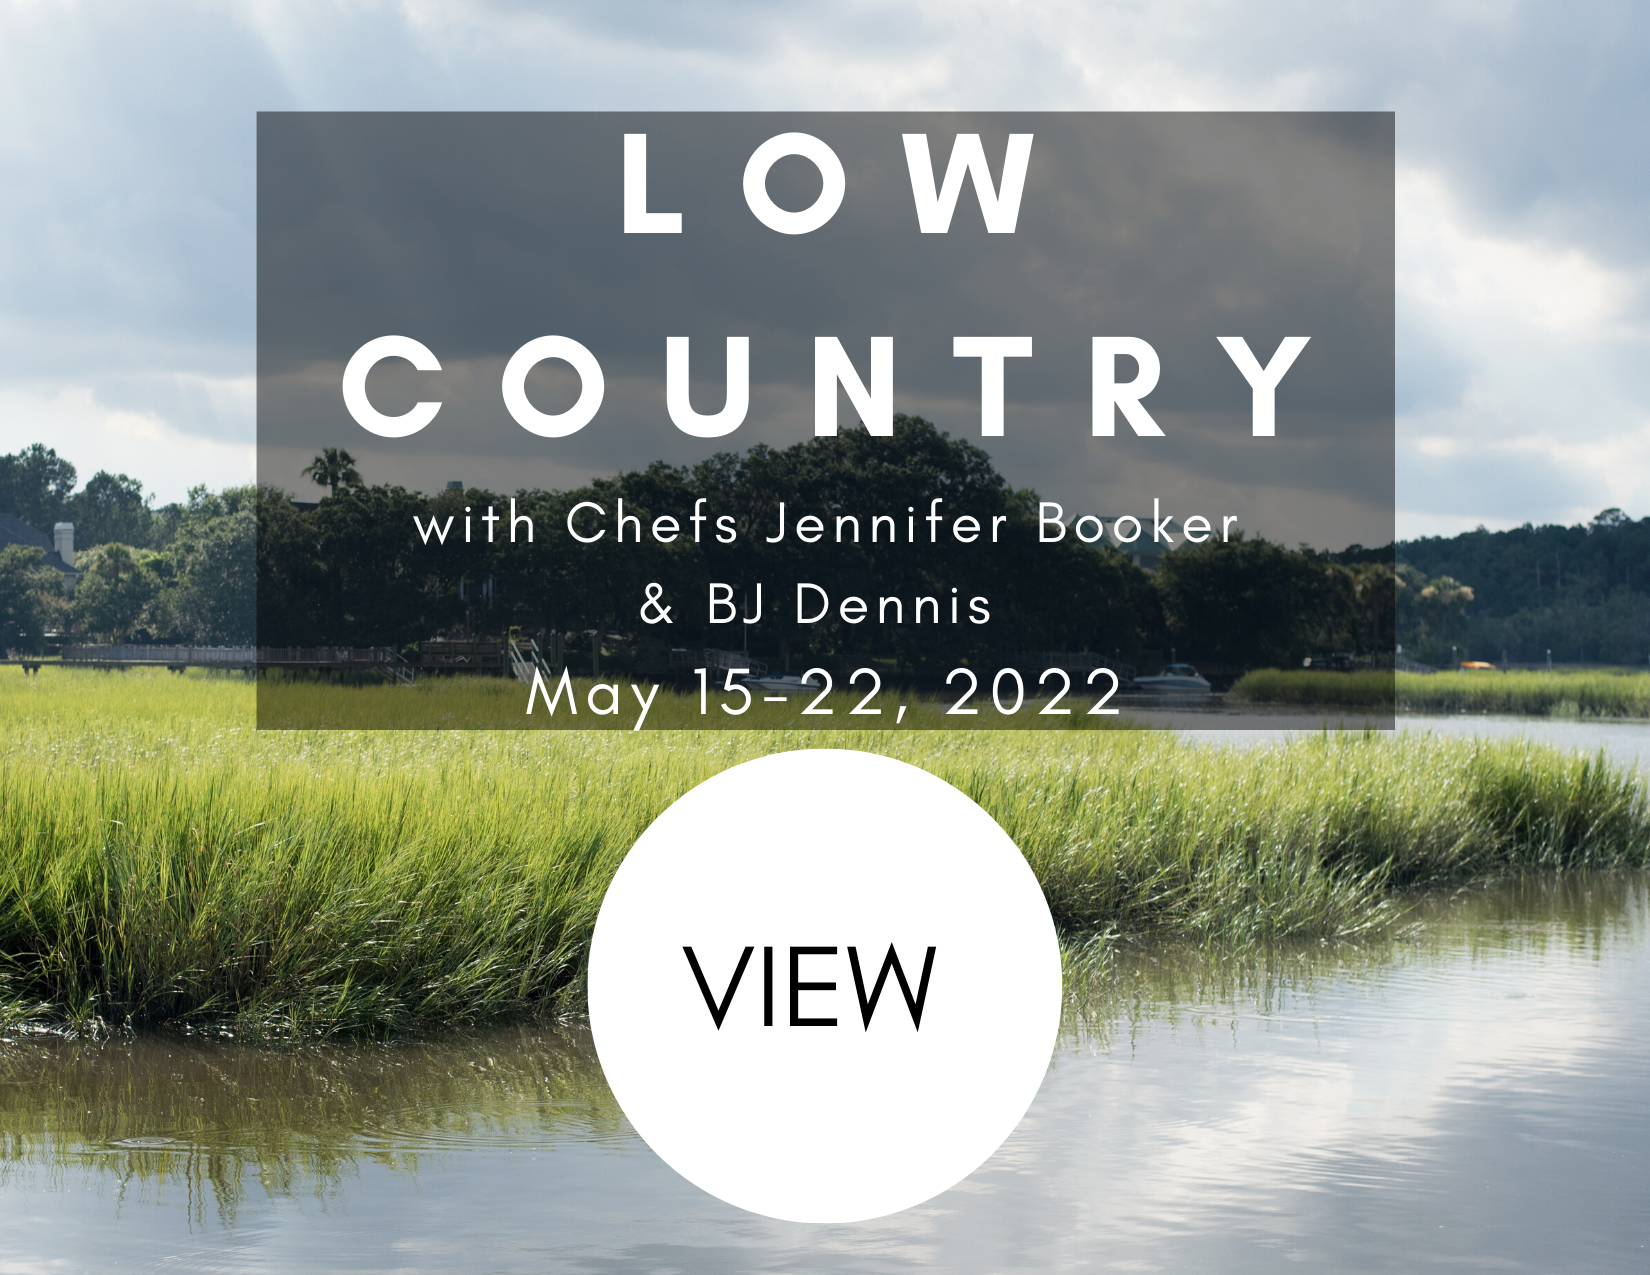 Low country culinary tour